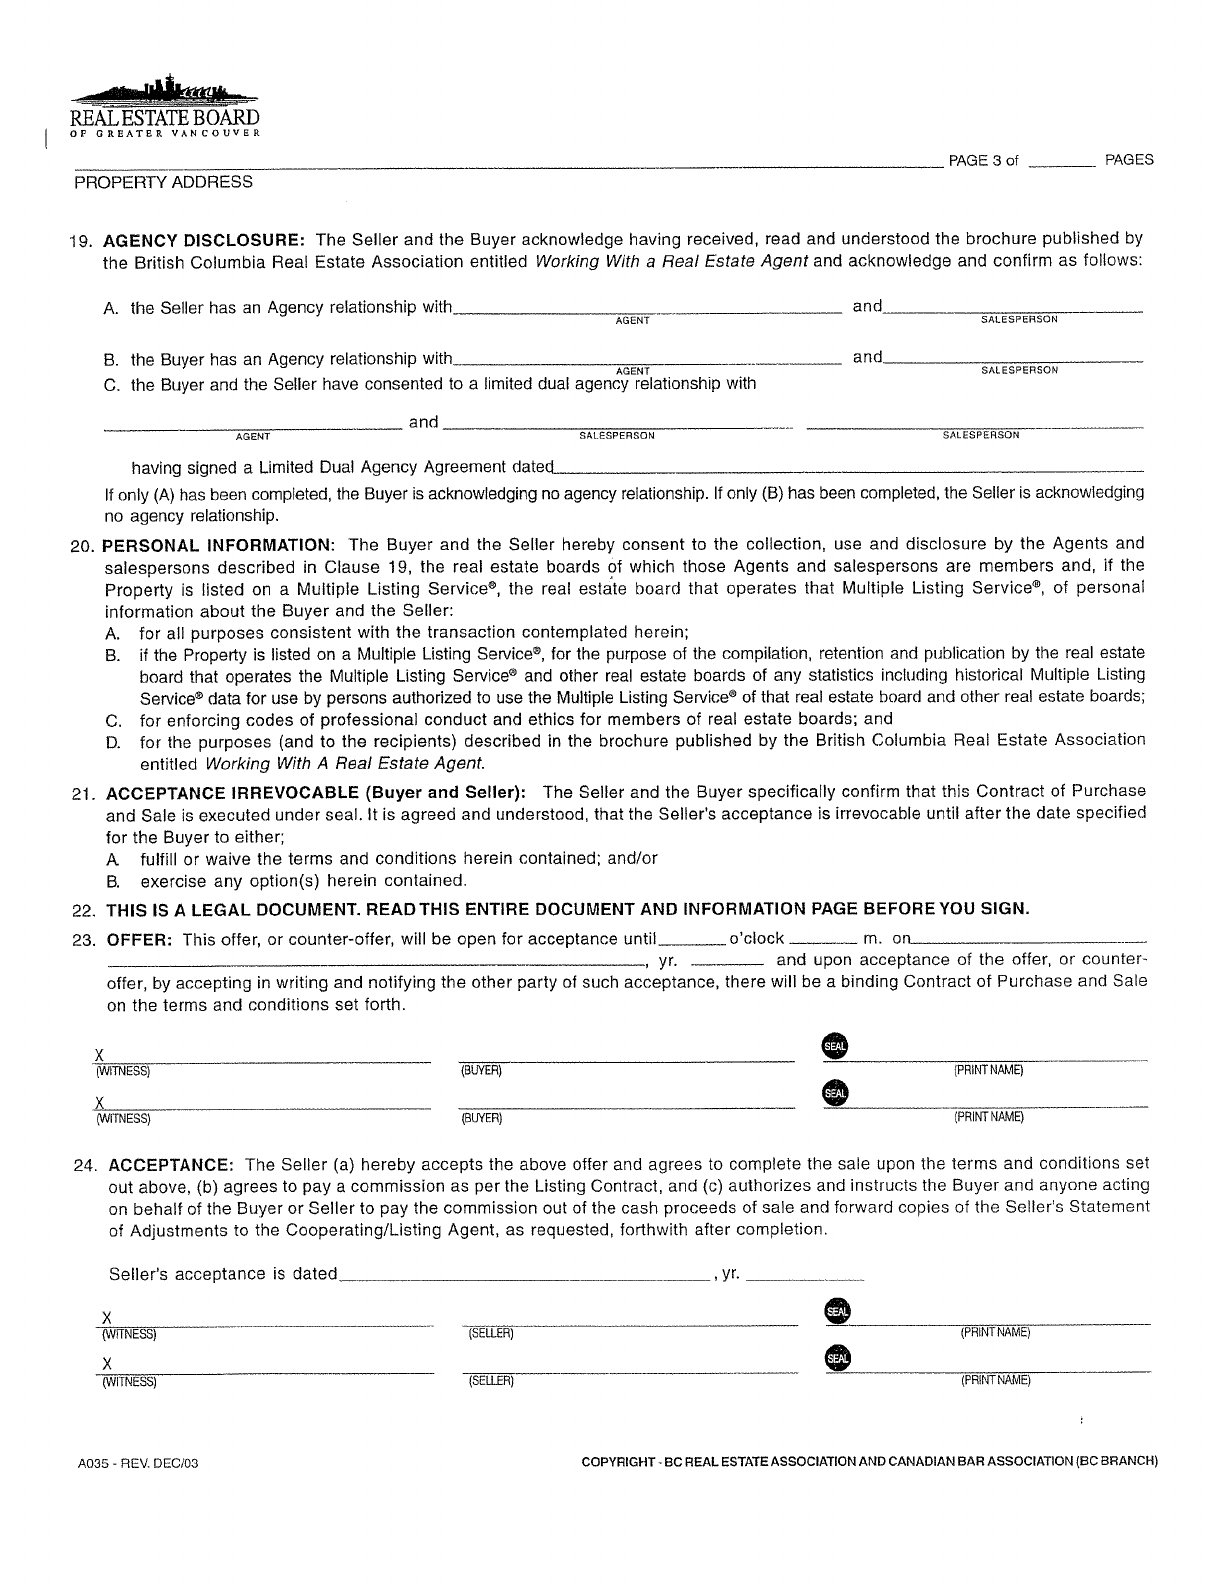 British Columbia Contract of Purchase and Sale Form 1